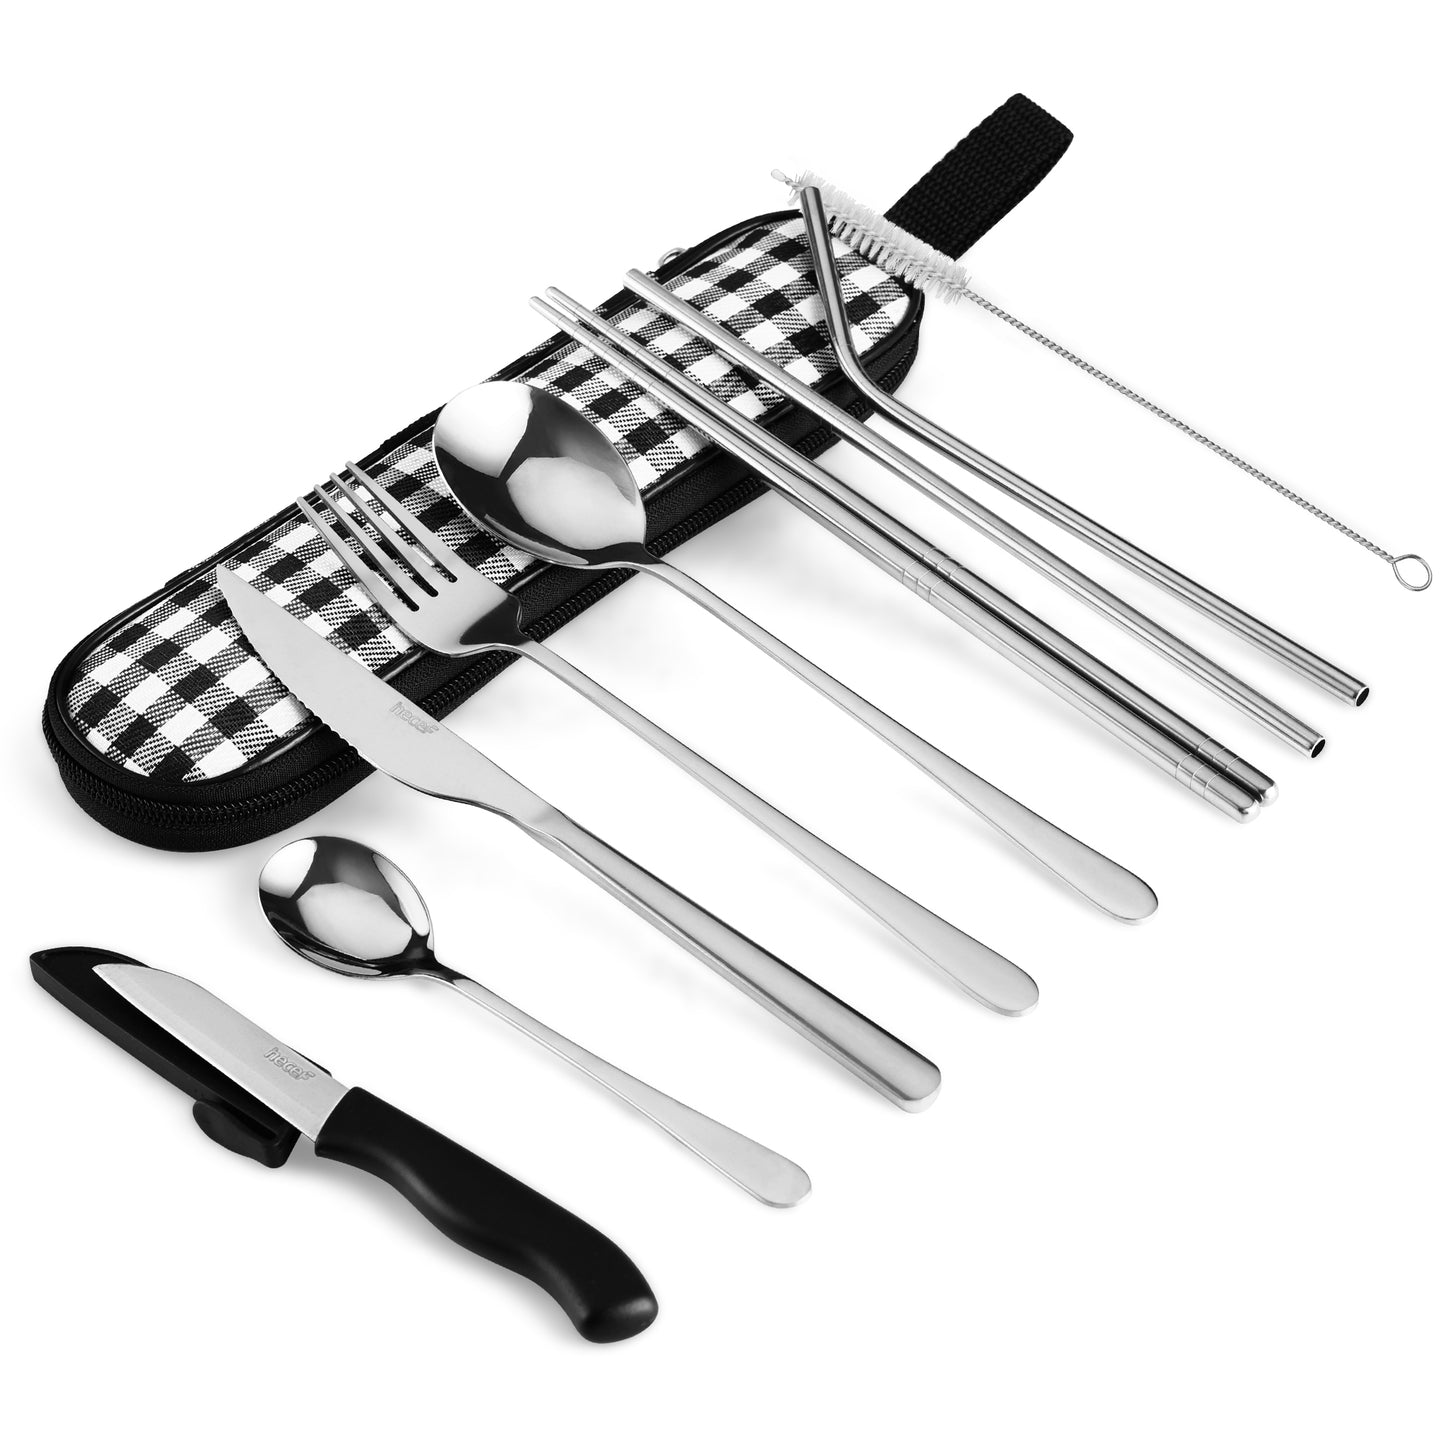 Travel Utensils, 8-Piece Reusable Utensils with Case, Travel Camping Cutlery  Set, Portable Stainless Steel Flatware Set Includes Knife, Fork, Spoon,  Chopsticks, Straws, Cleaning Brush, Rainbow